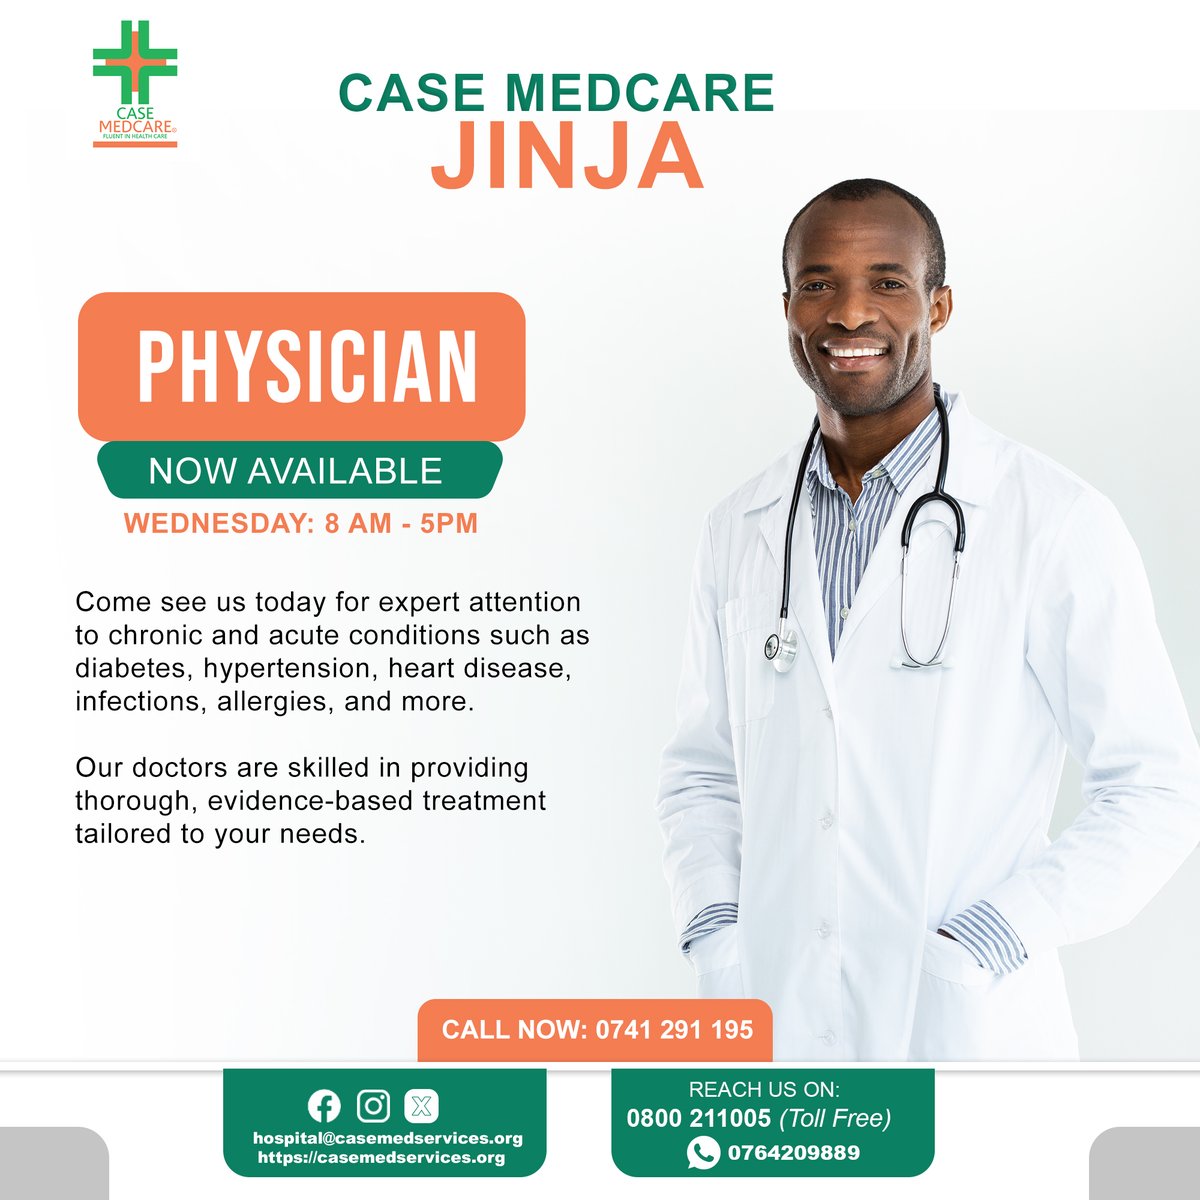 🏥 Need medical attention in Jinja? Our expert physician is now available at the Case Medcare Jinja Facility! Book your appointment today for quality care. #Healthcare #Jinja #FluentInHealhcare